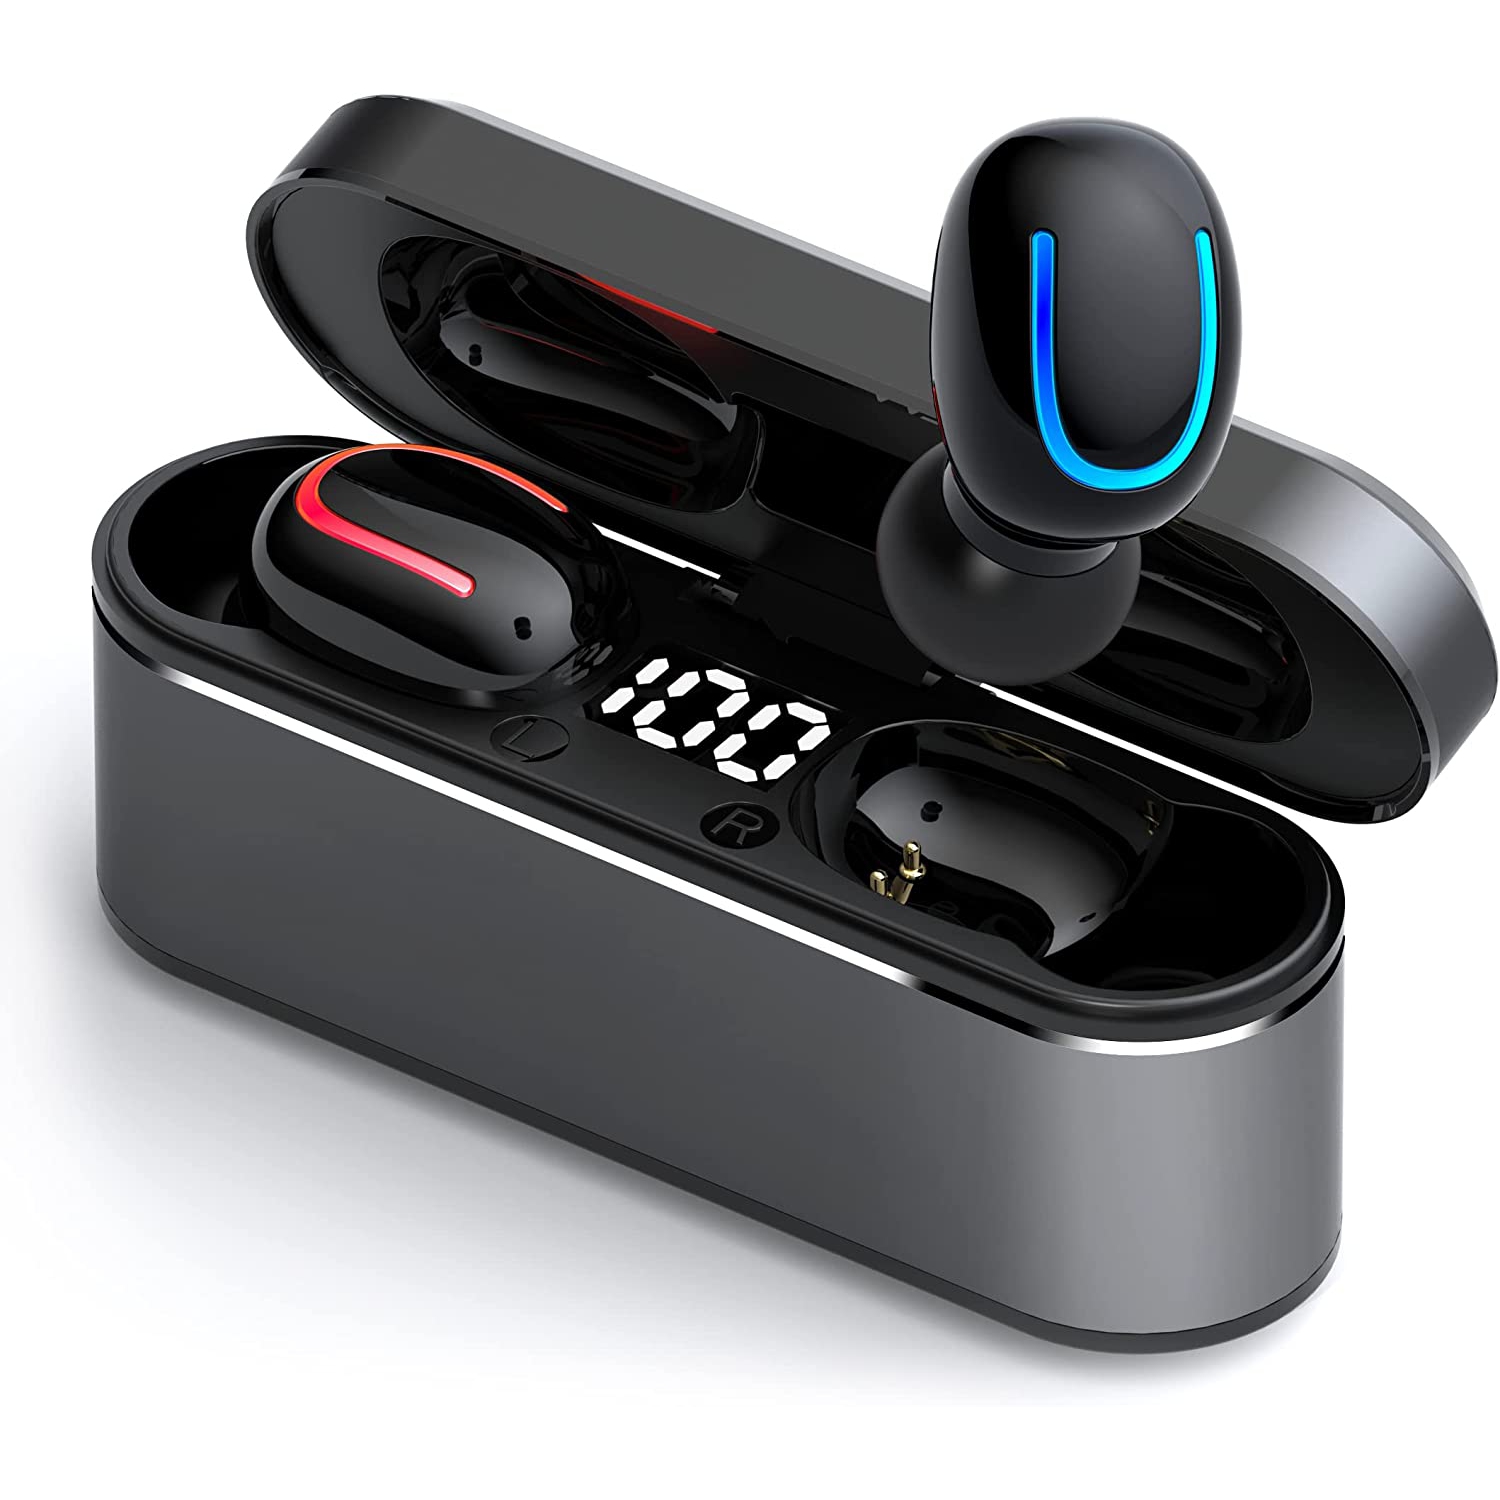 Dolaer Wireless Earbuds Bluetooth 5.1 True Wireless Earbuds with Microphone,Noise Cancelling Wireless Ear Buds,Smallest Earbuds for Android,iOS,Ear Phone Wireless Earbuds,audifonos